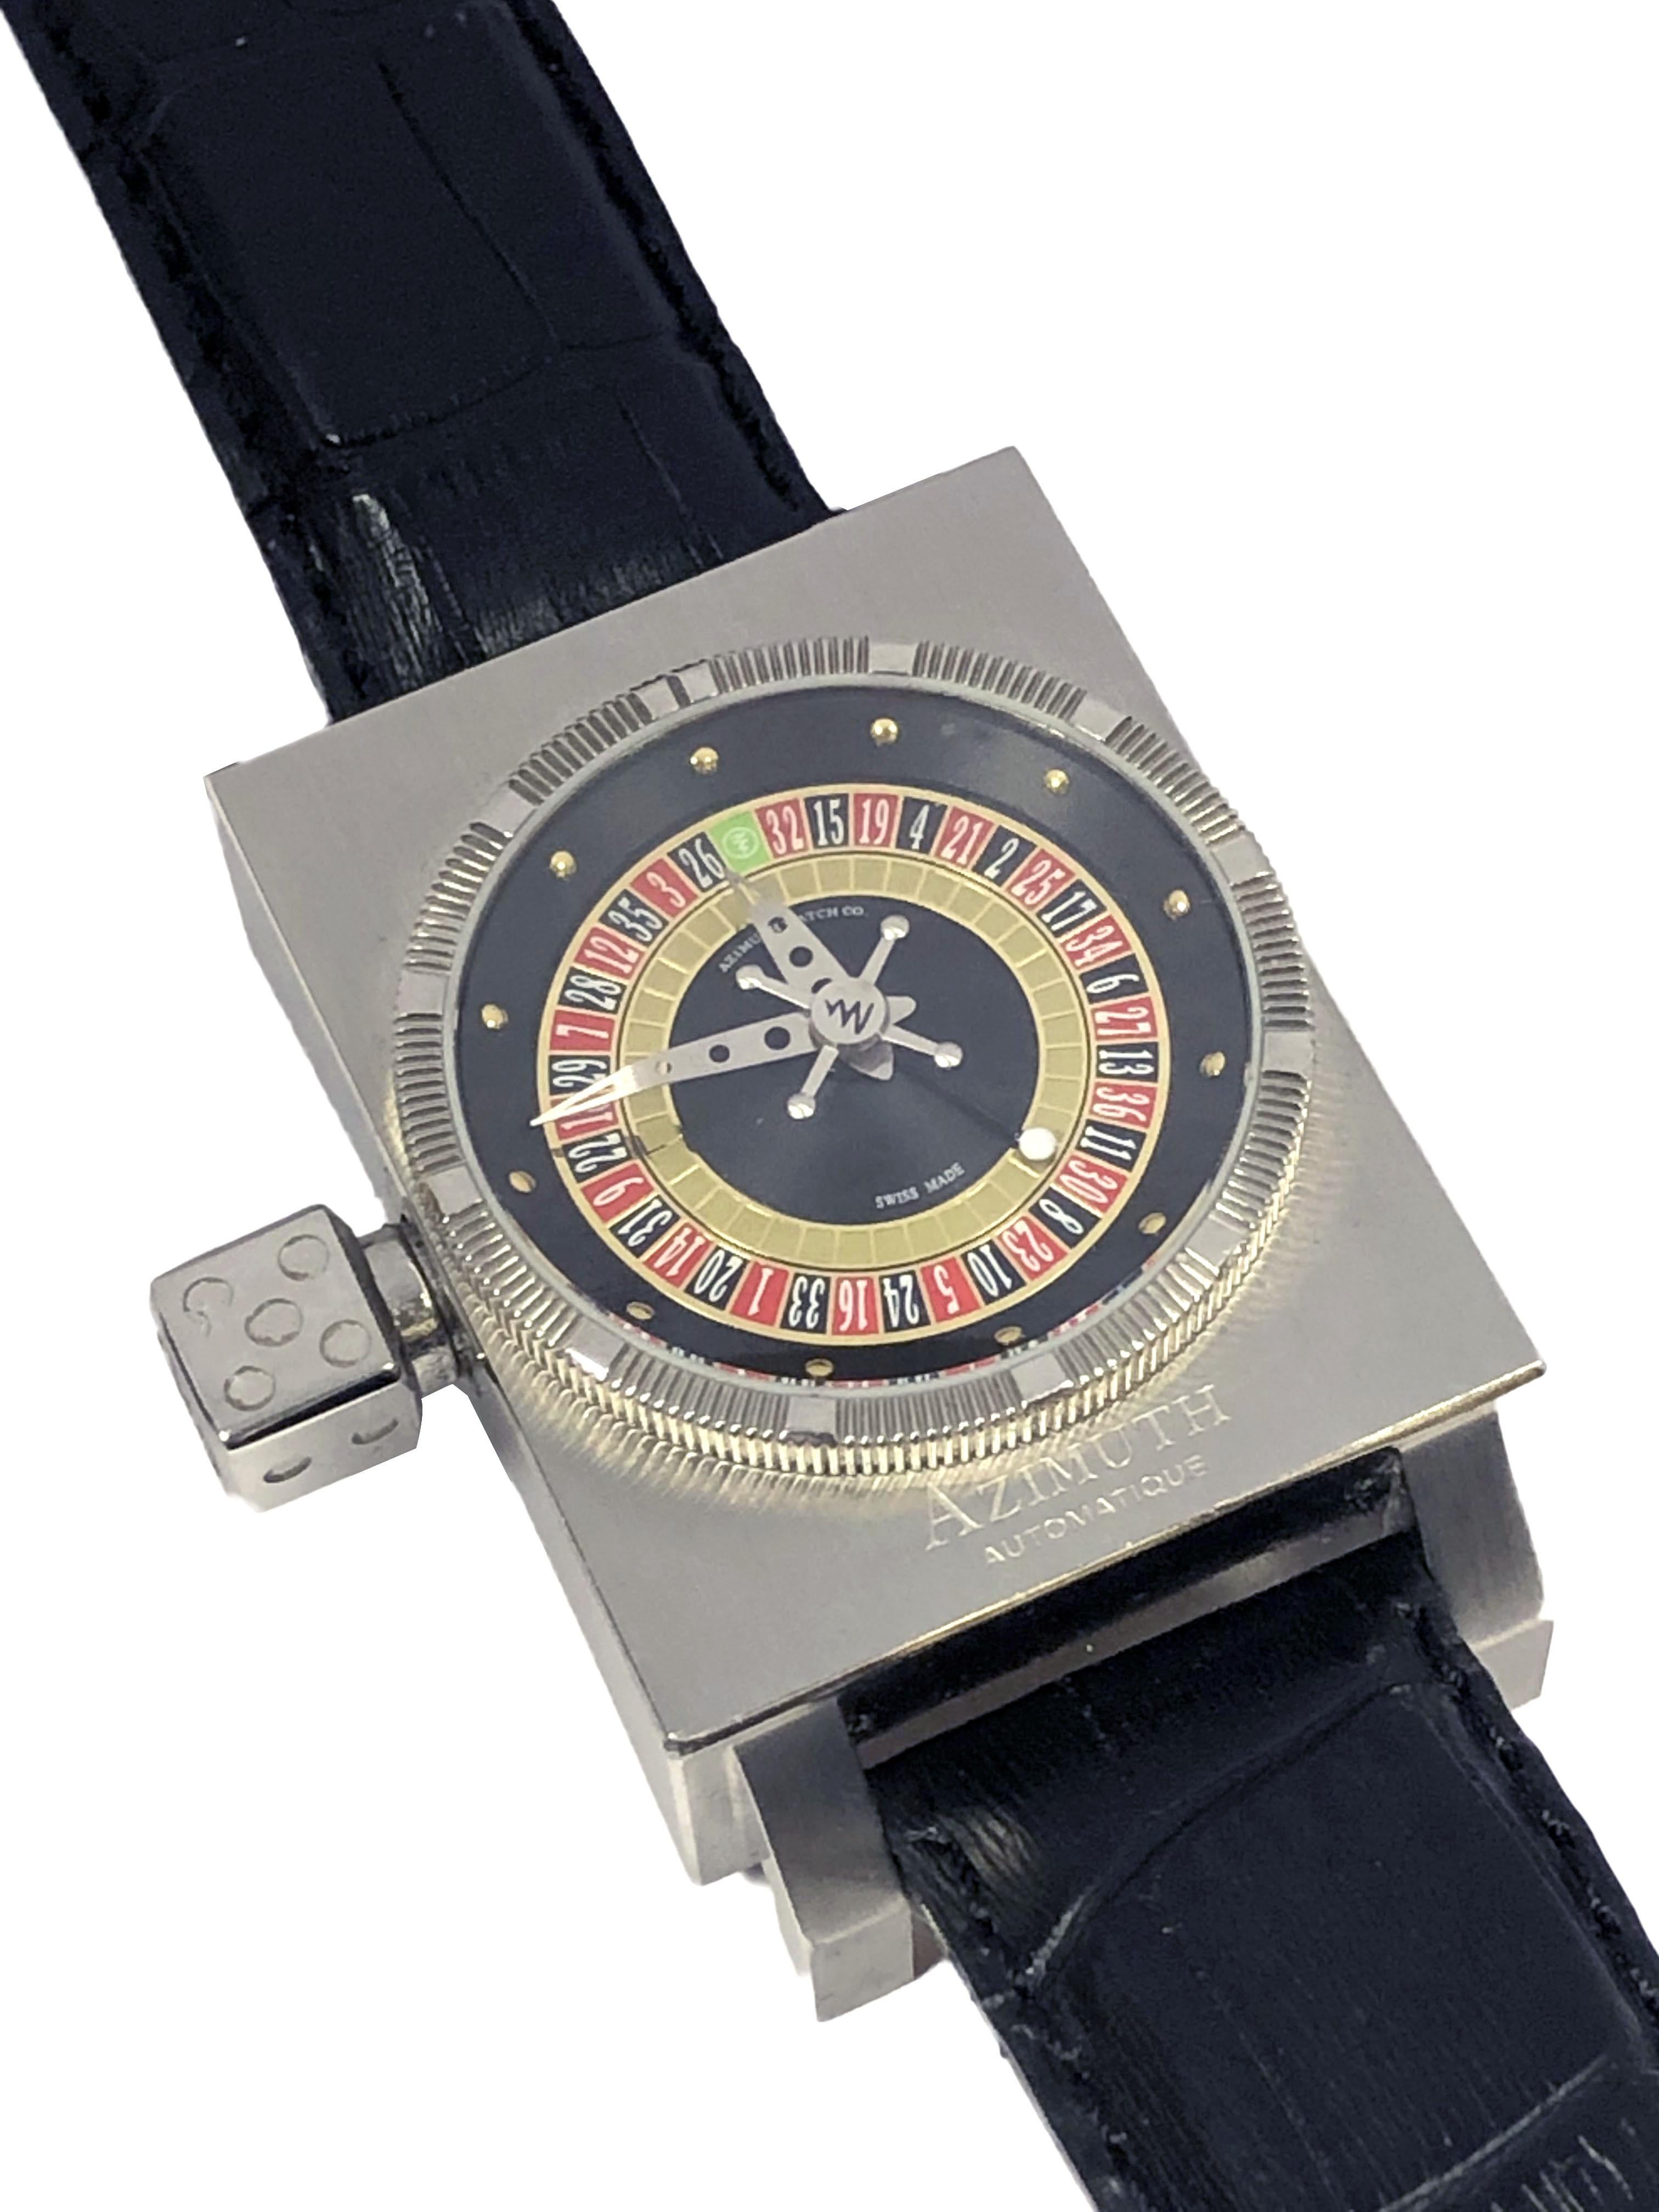 Azimuth SP 1 King Casino Steel Automatic Roulette Wrist Watch In Excellent Condition For Sale In Chicago, IL